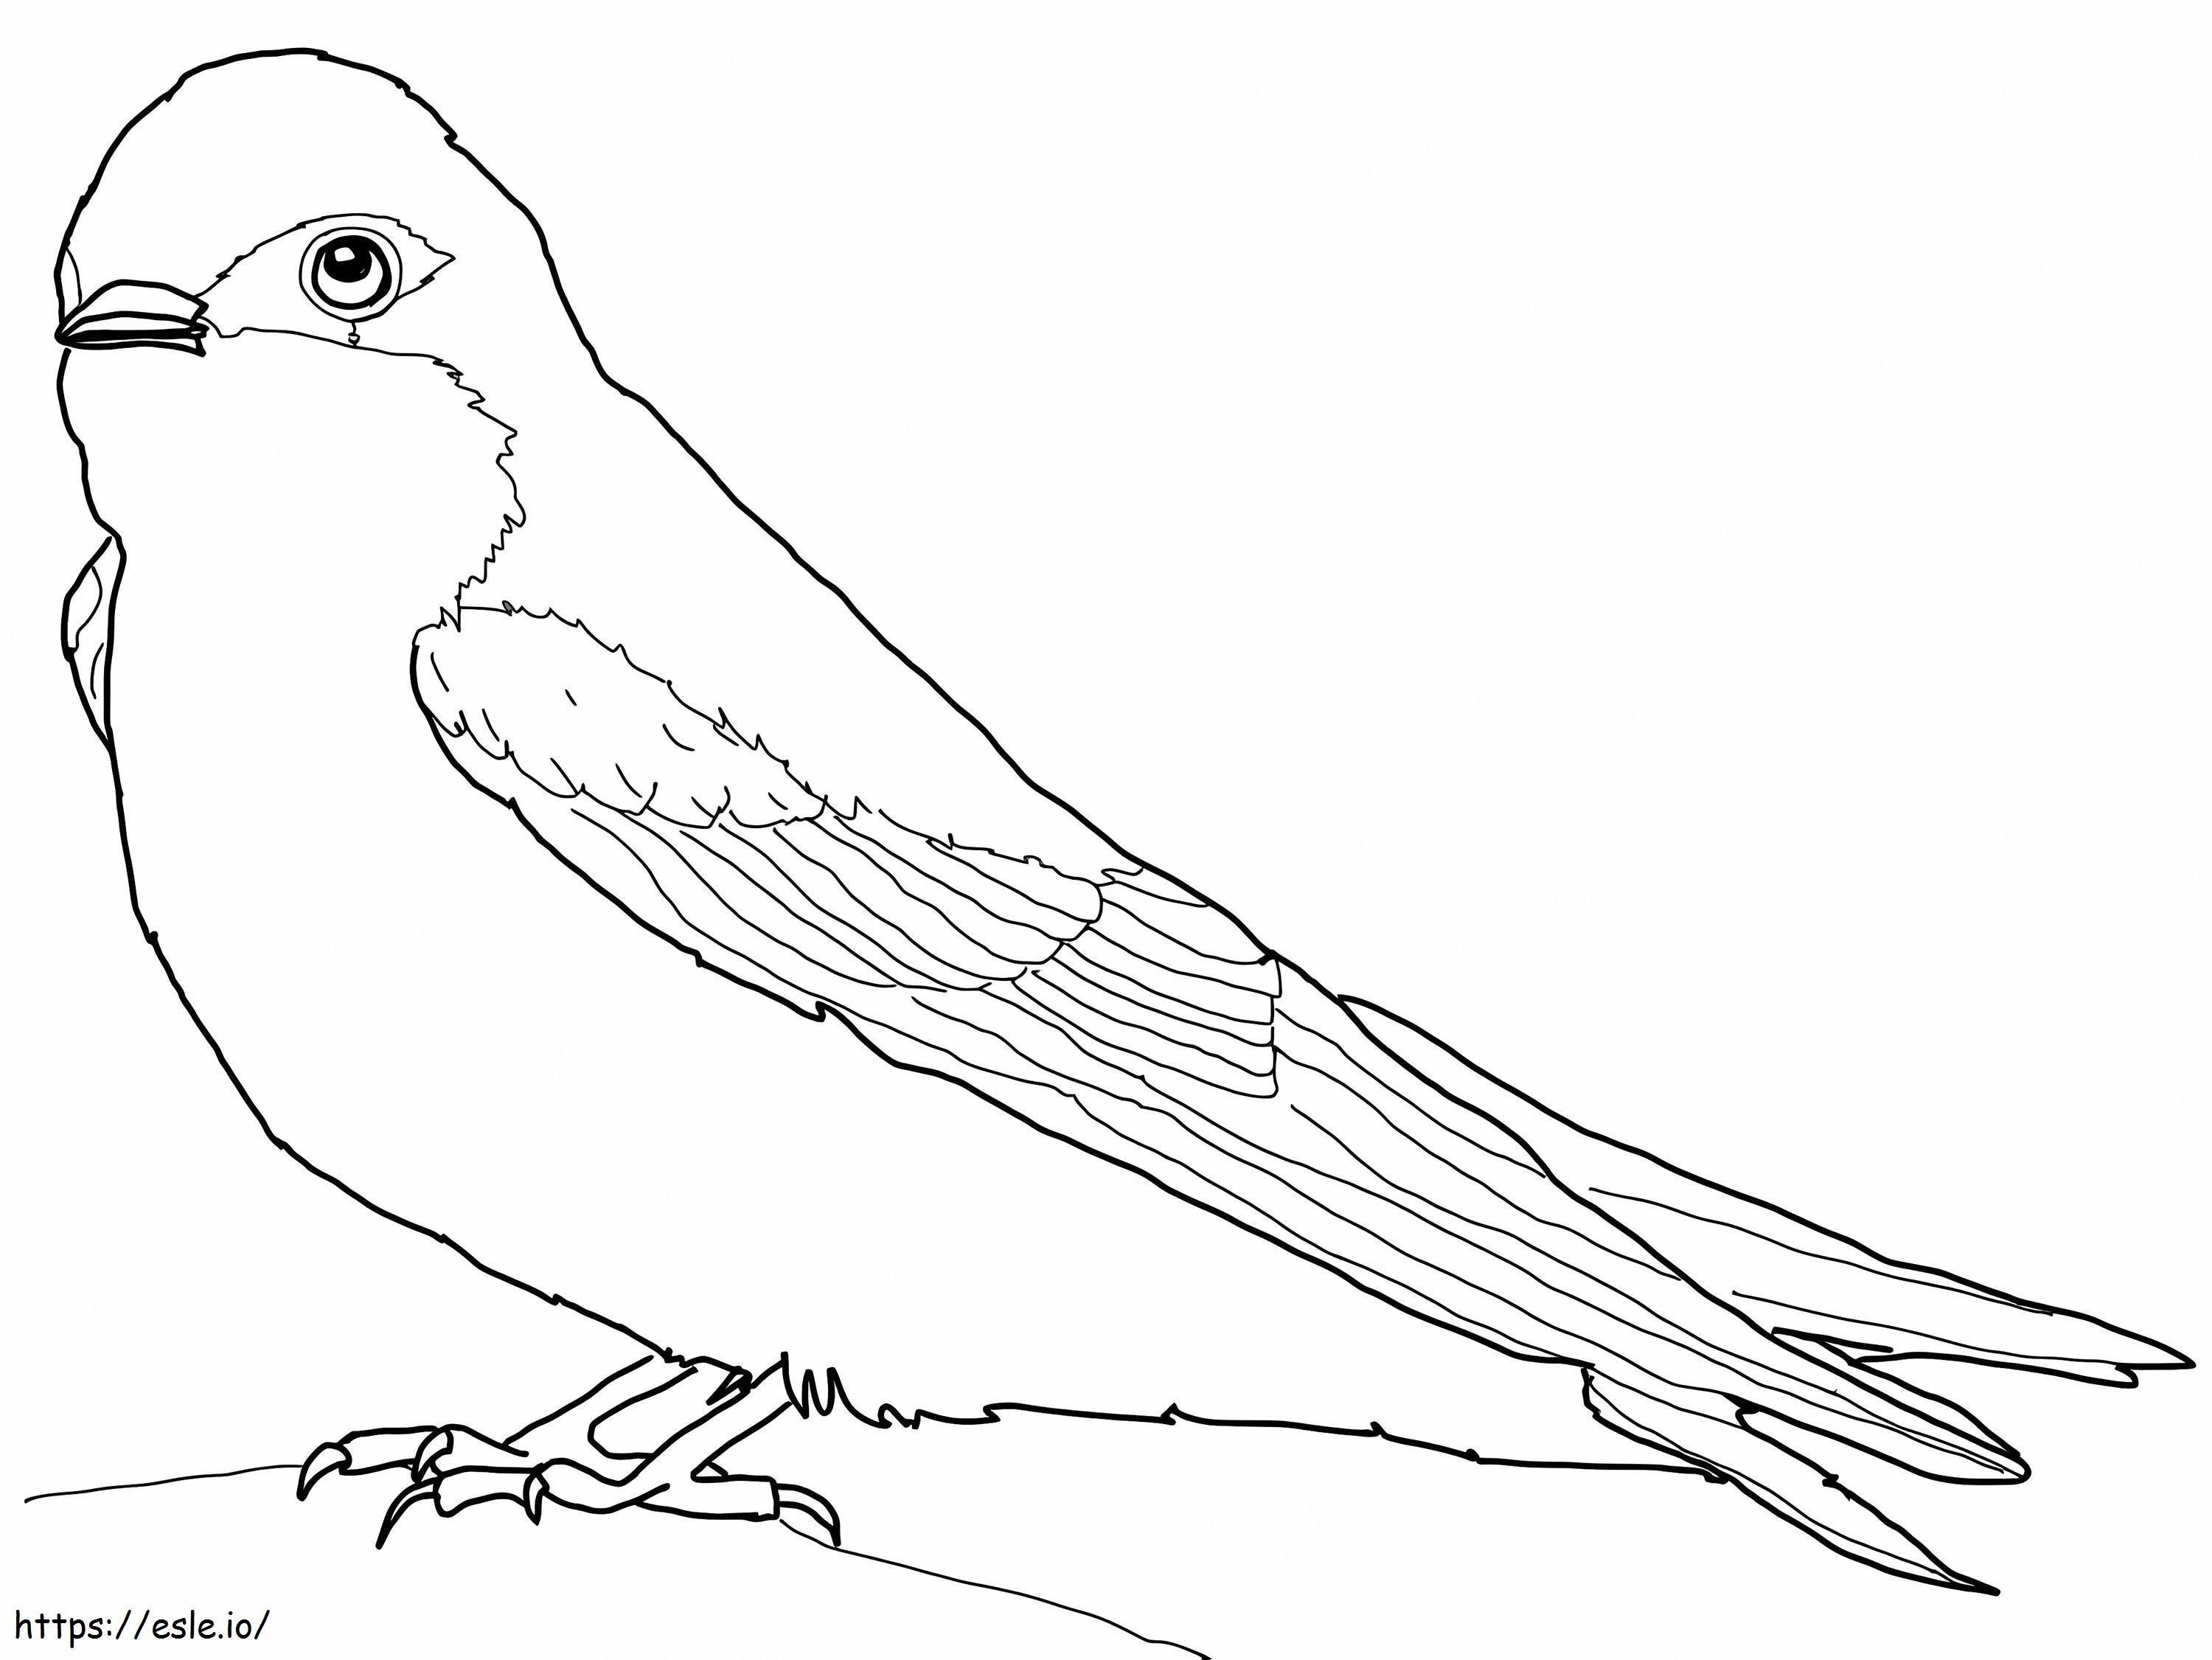 Tree Swallow 1 coloring page